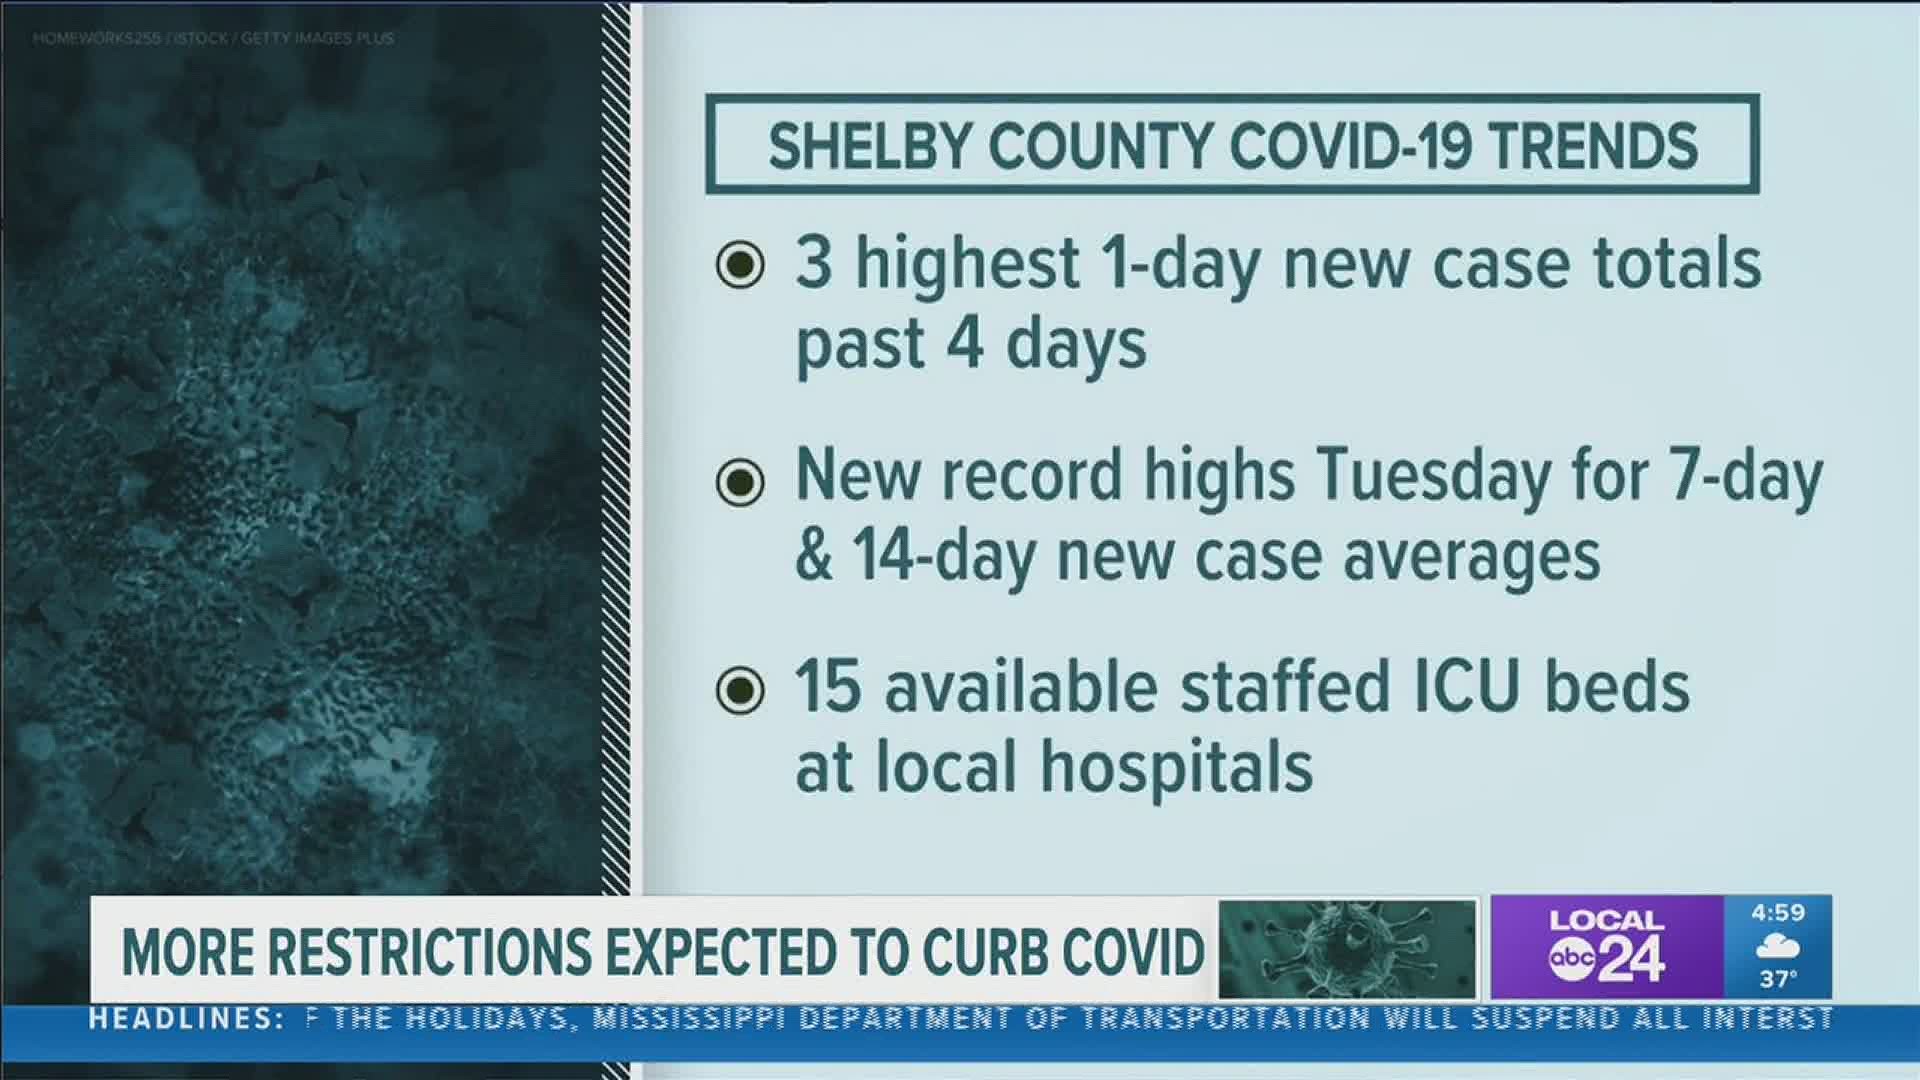 The Shelby County Health Director also outlined new timeline for the COVID-19 vaccine for first responders and those at assisted living facilities.